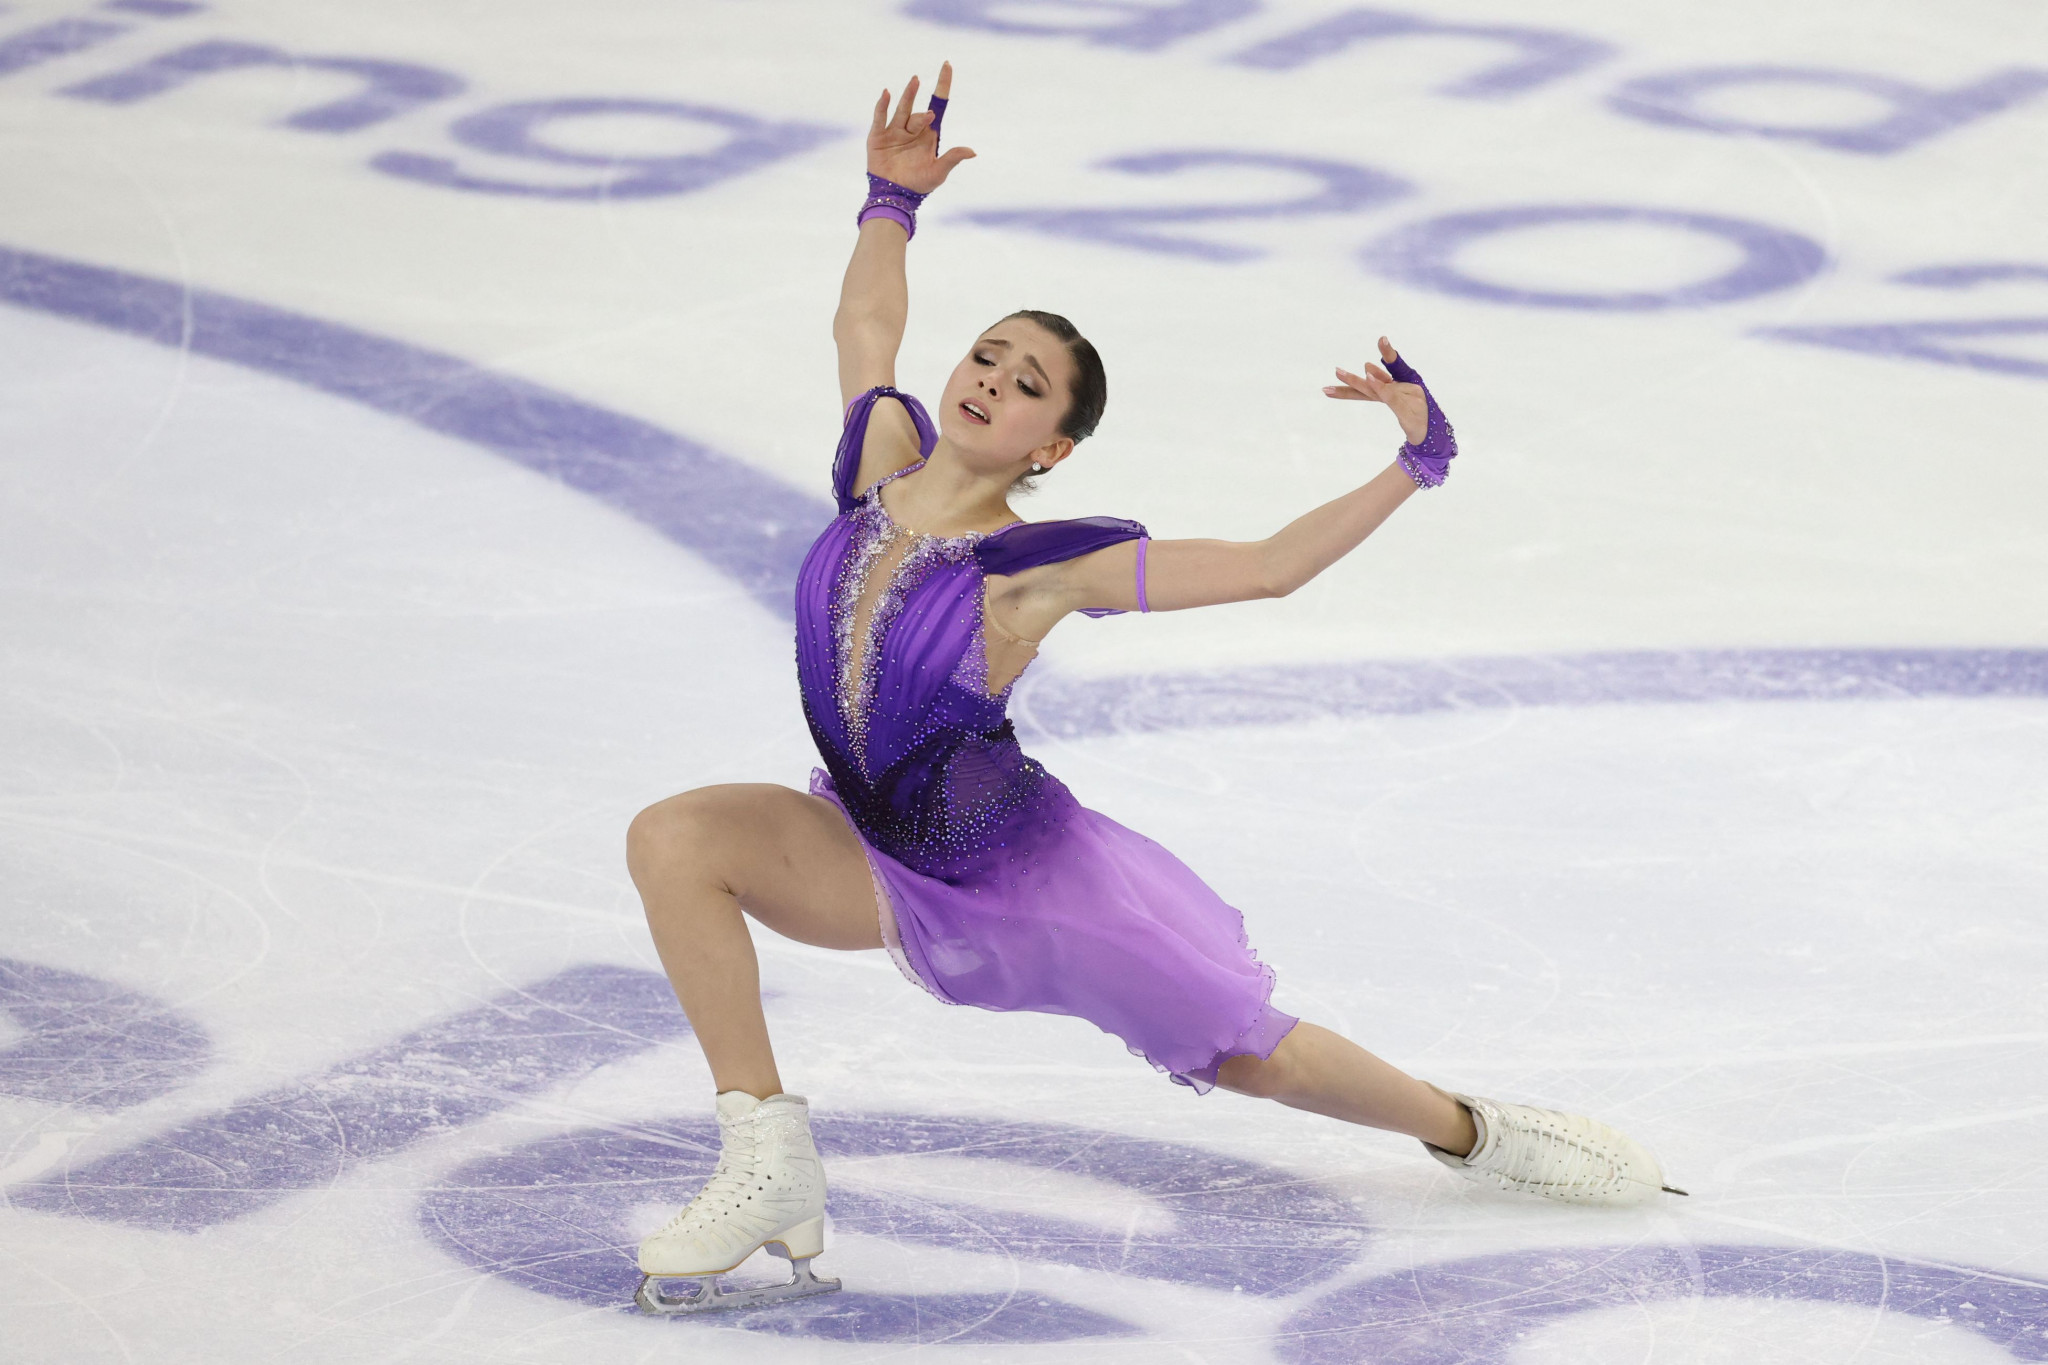 US skater Calalang claims "doping is doping" in post on Valieva - despite having fought own drugs case